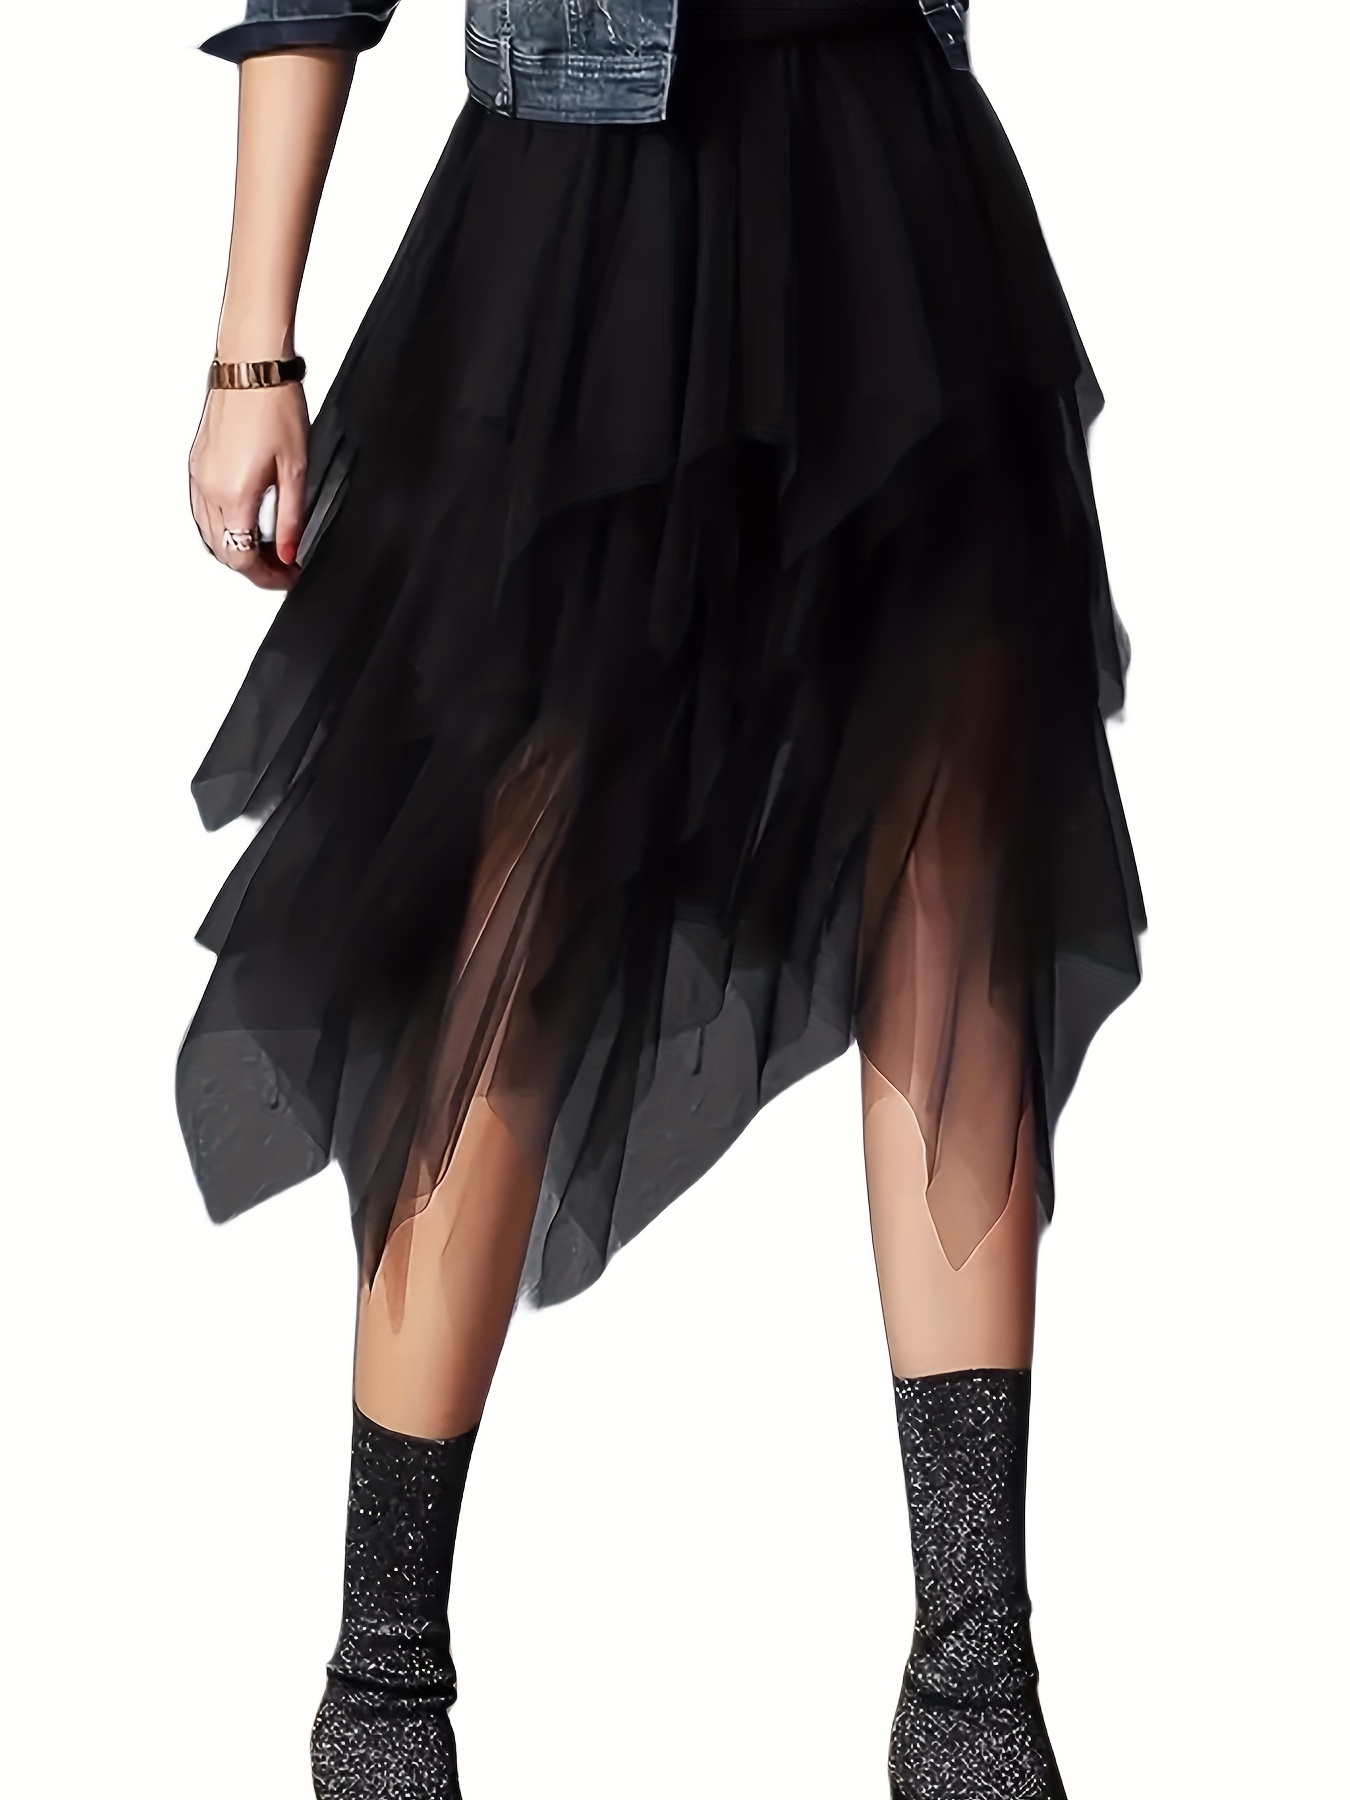 Black High Waisted Tulle Skirt Outfit Women High Waisted Tulle